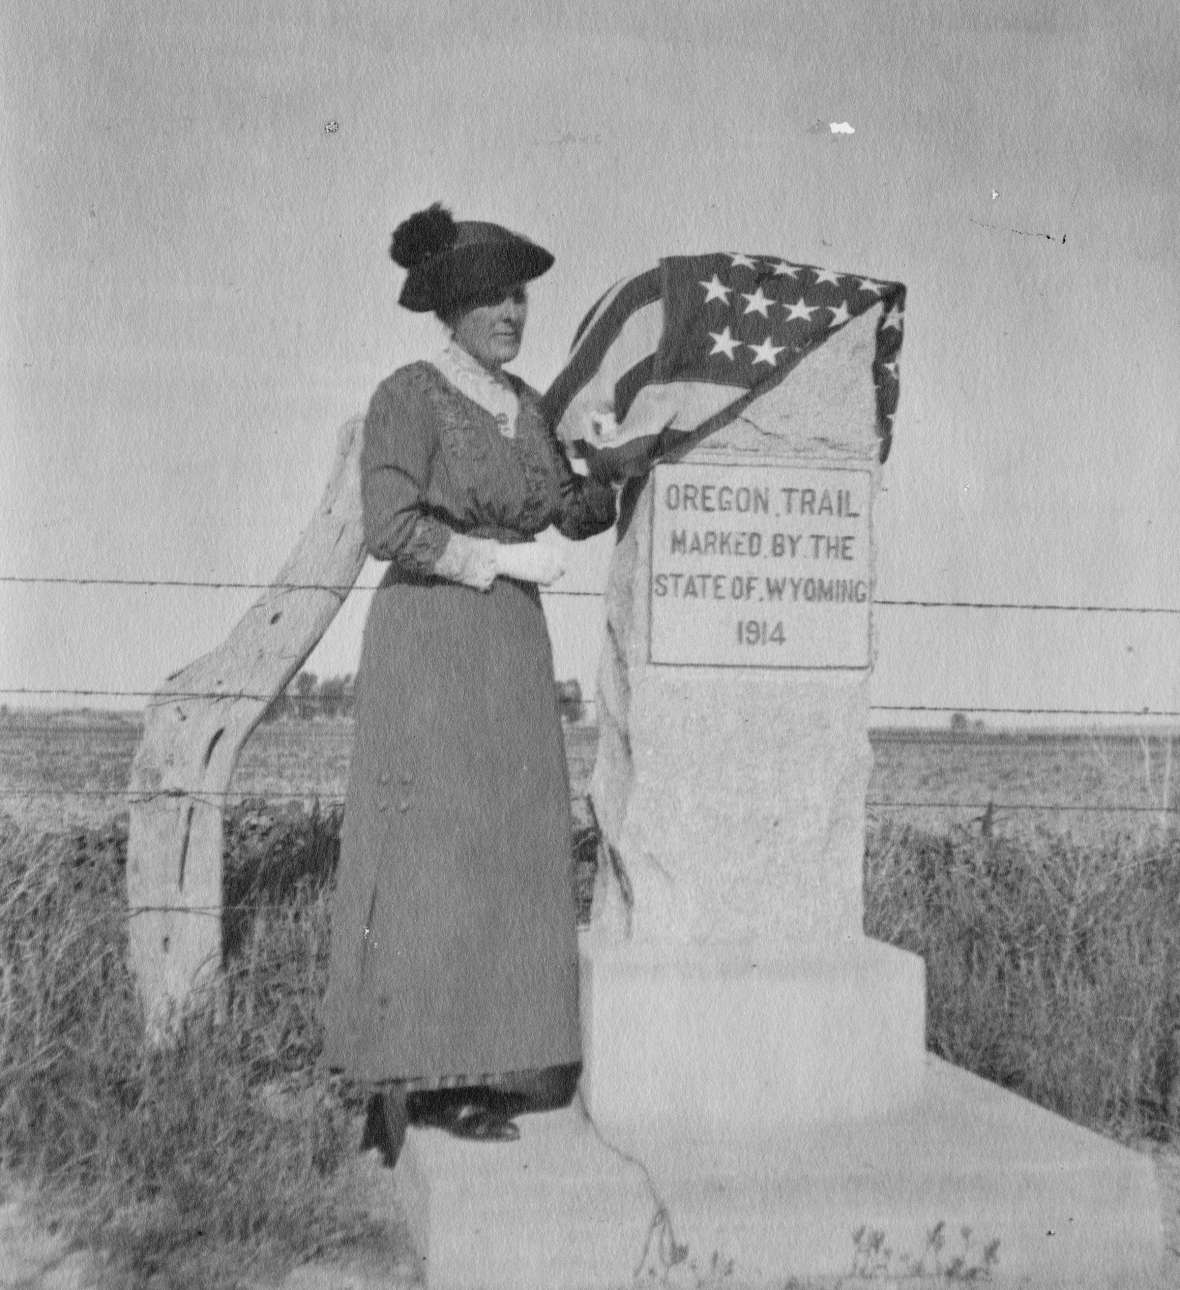 By 1911, Daughters of American Revolution chapters in Wyoming had begun marking historic trails. University of Wyoming professor and D.A.R. State Regent Grace Raymond Hebard lobbied heavily for a state-D.A.R partnership. In 1913, the legislature established a three-member Oregon Trail Commission with a budget of $2,500. Hebard joined the commission in 1914. Here she dedicates a marker on the trail just west of Torrington, Wyo., June 17, 1915. American Heritage Center.